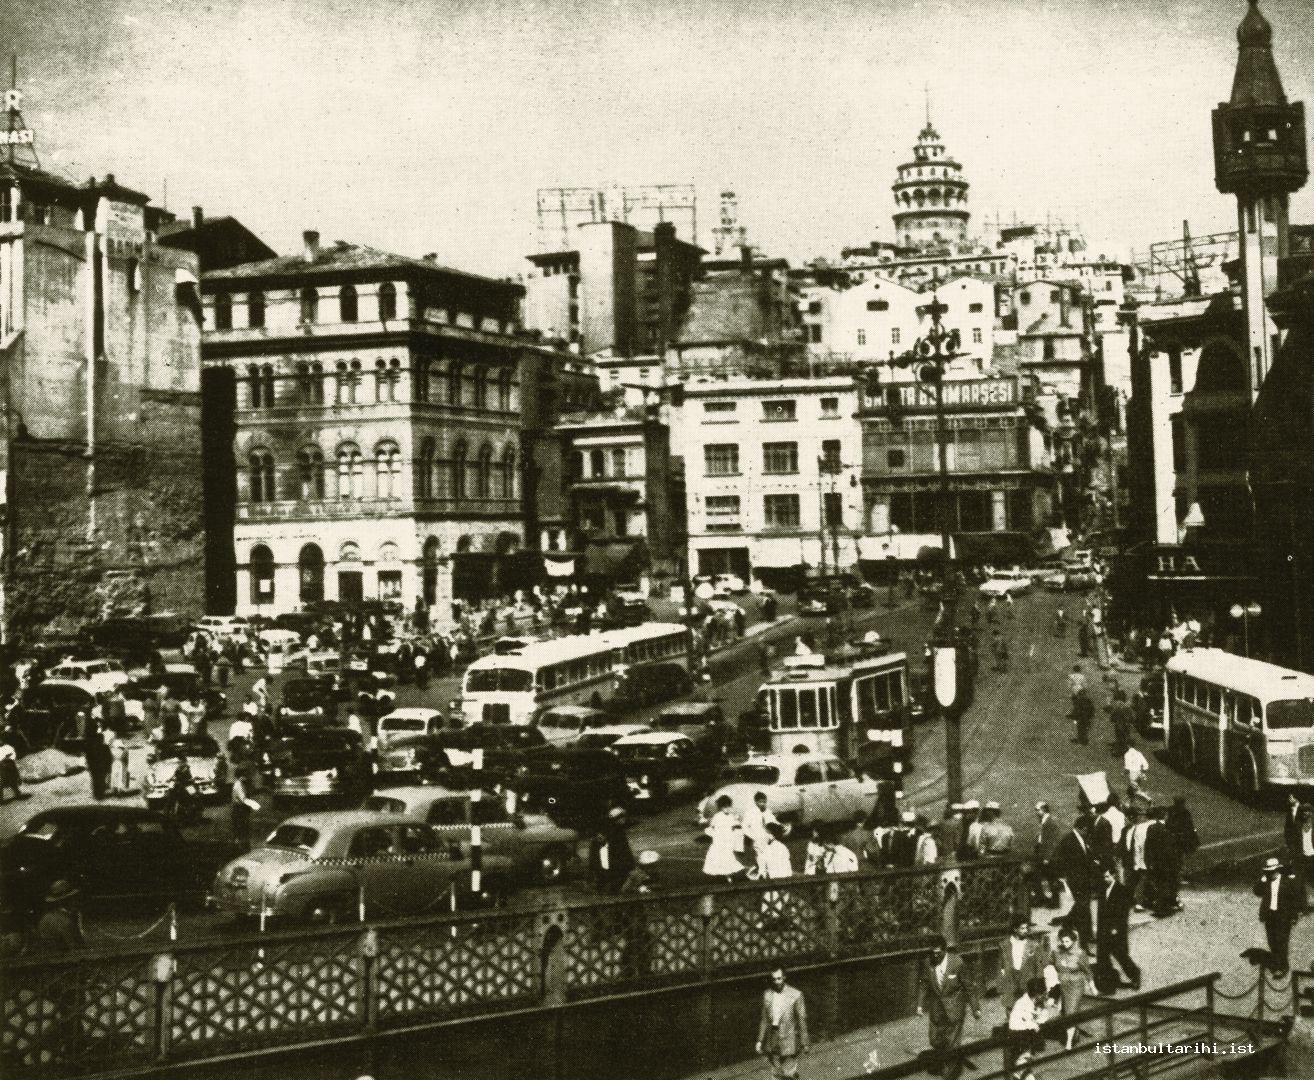 17- “We see the first stage of the works of opening a square in Karaköy in this
            picture. This square will be widened and become both an adornment of the city
            at its gate from the sea side and also a passage through which the traffic of the
            European side can be easly flow.”
            